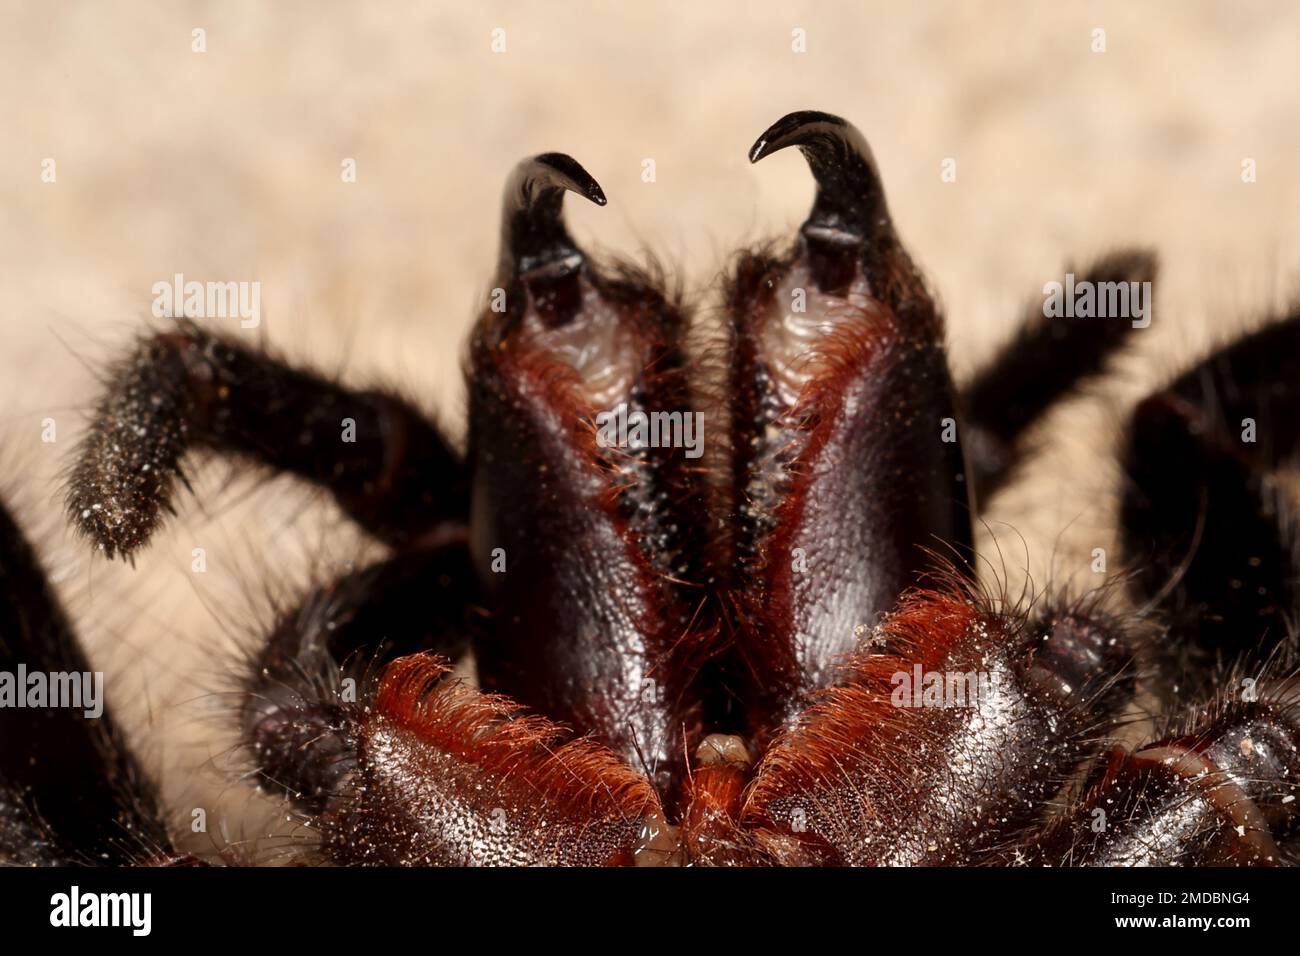 Highly venomous Sydney Funnel Web Spider reared up for striking Stock Photo